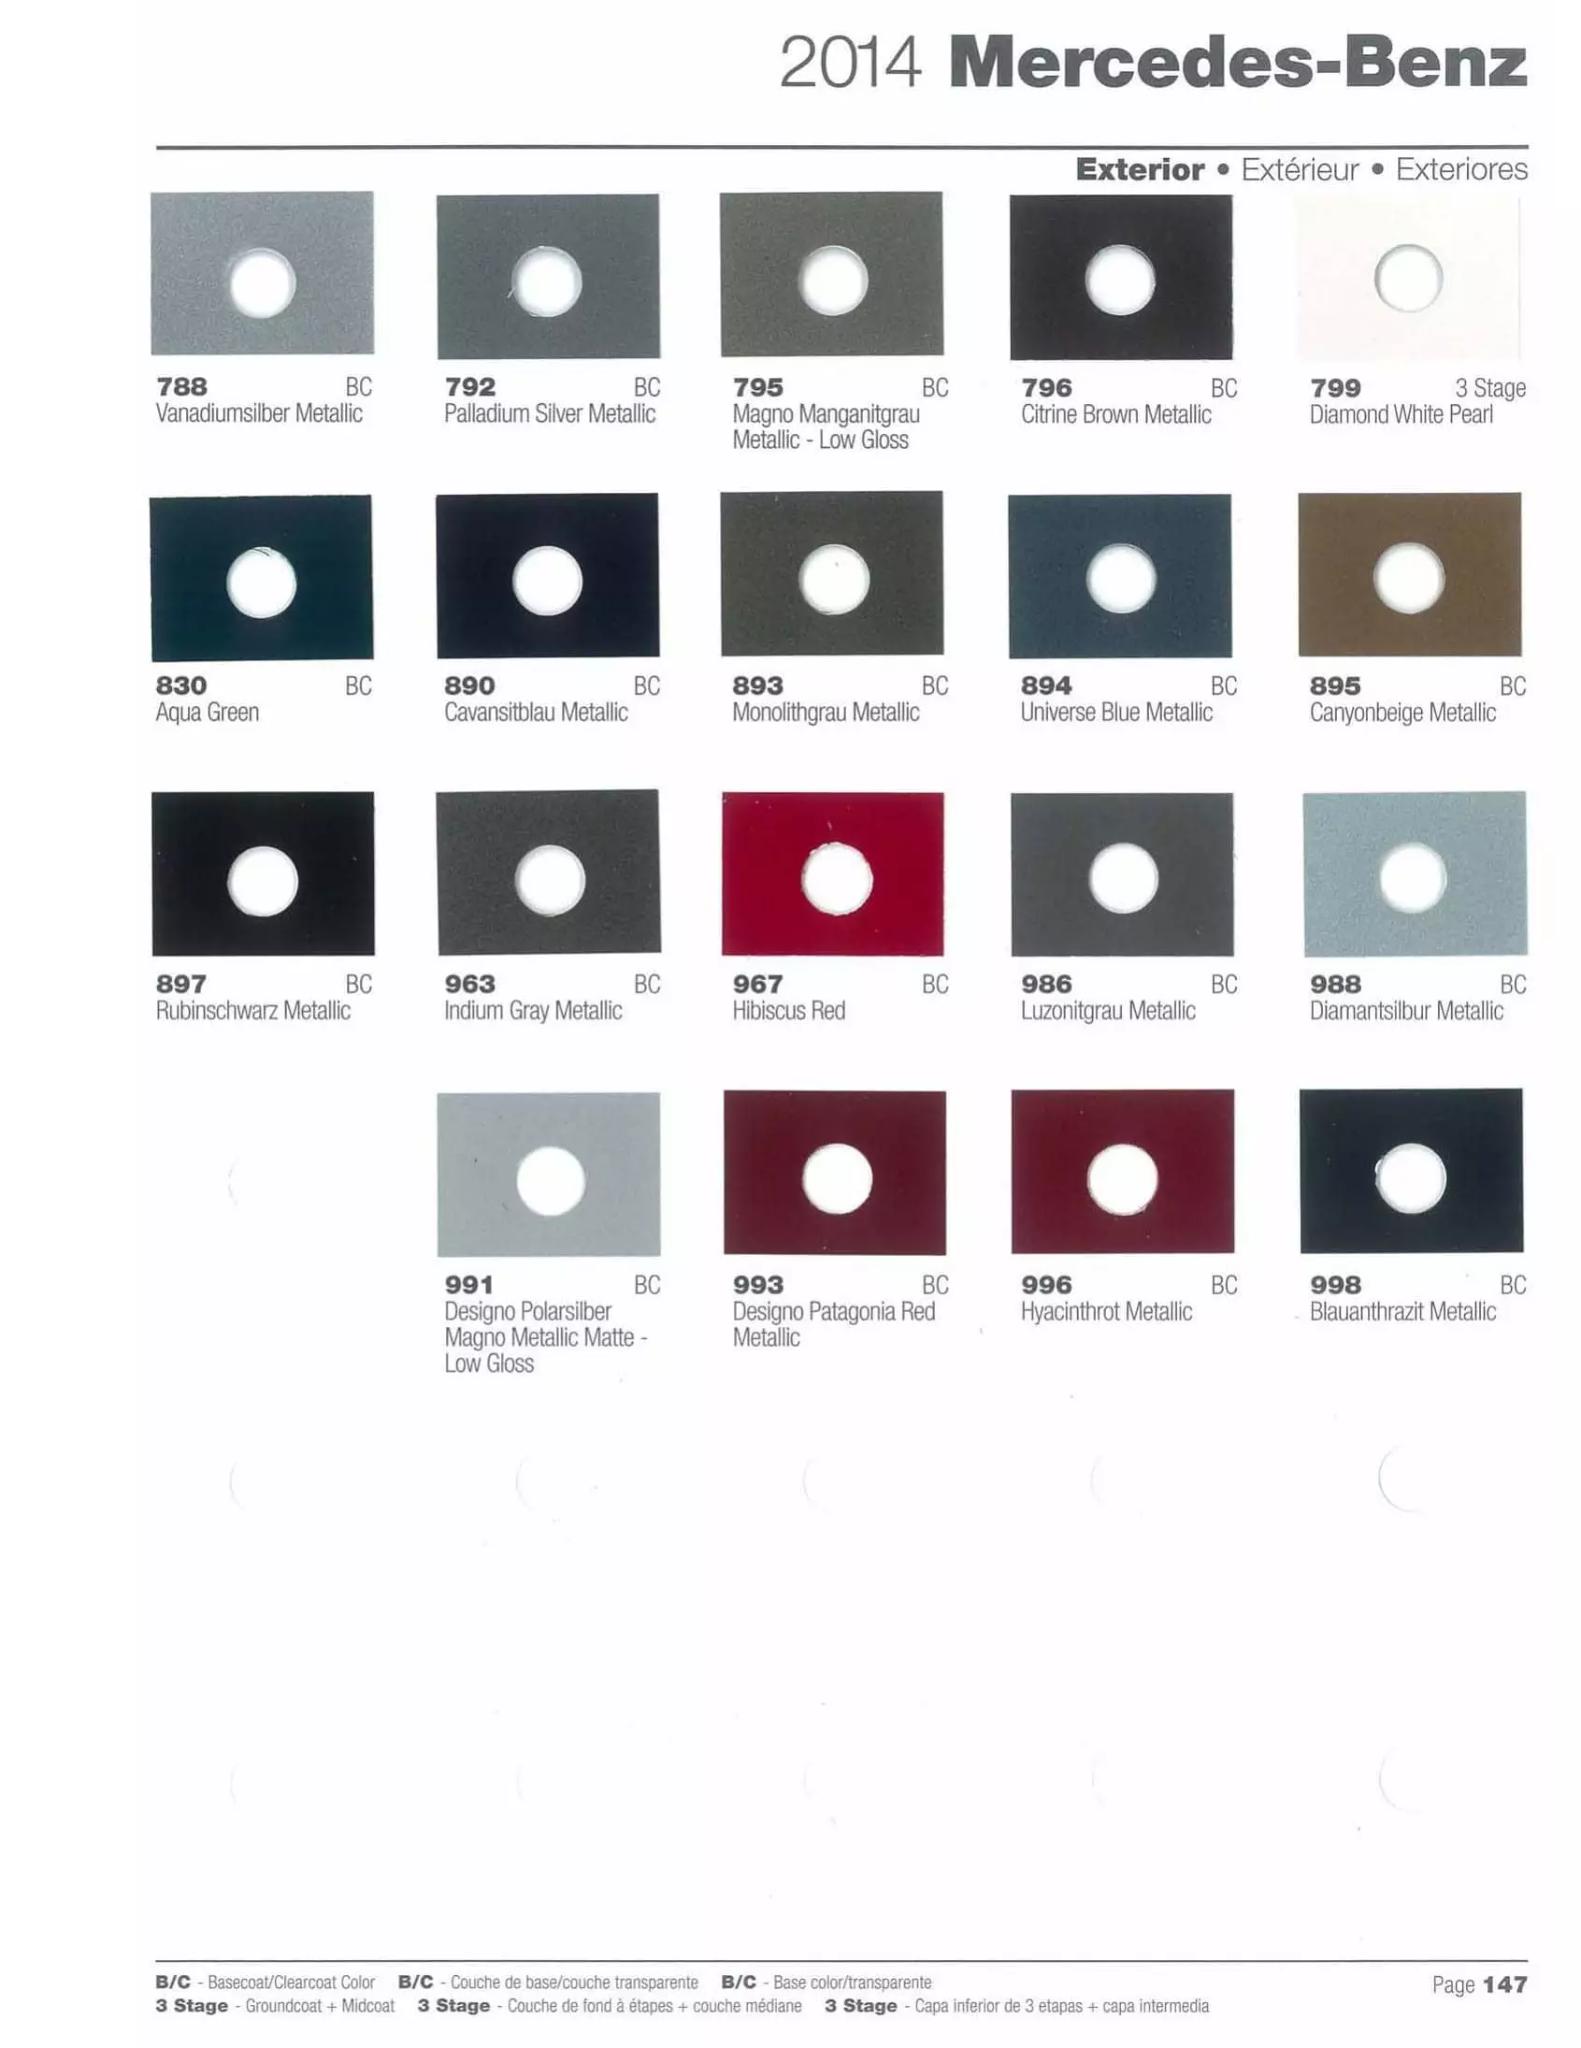 Paint codes, and their ordering stock numbers for their color on 2014 vehicles